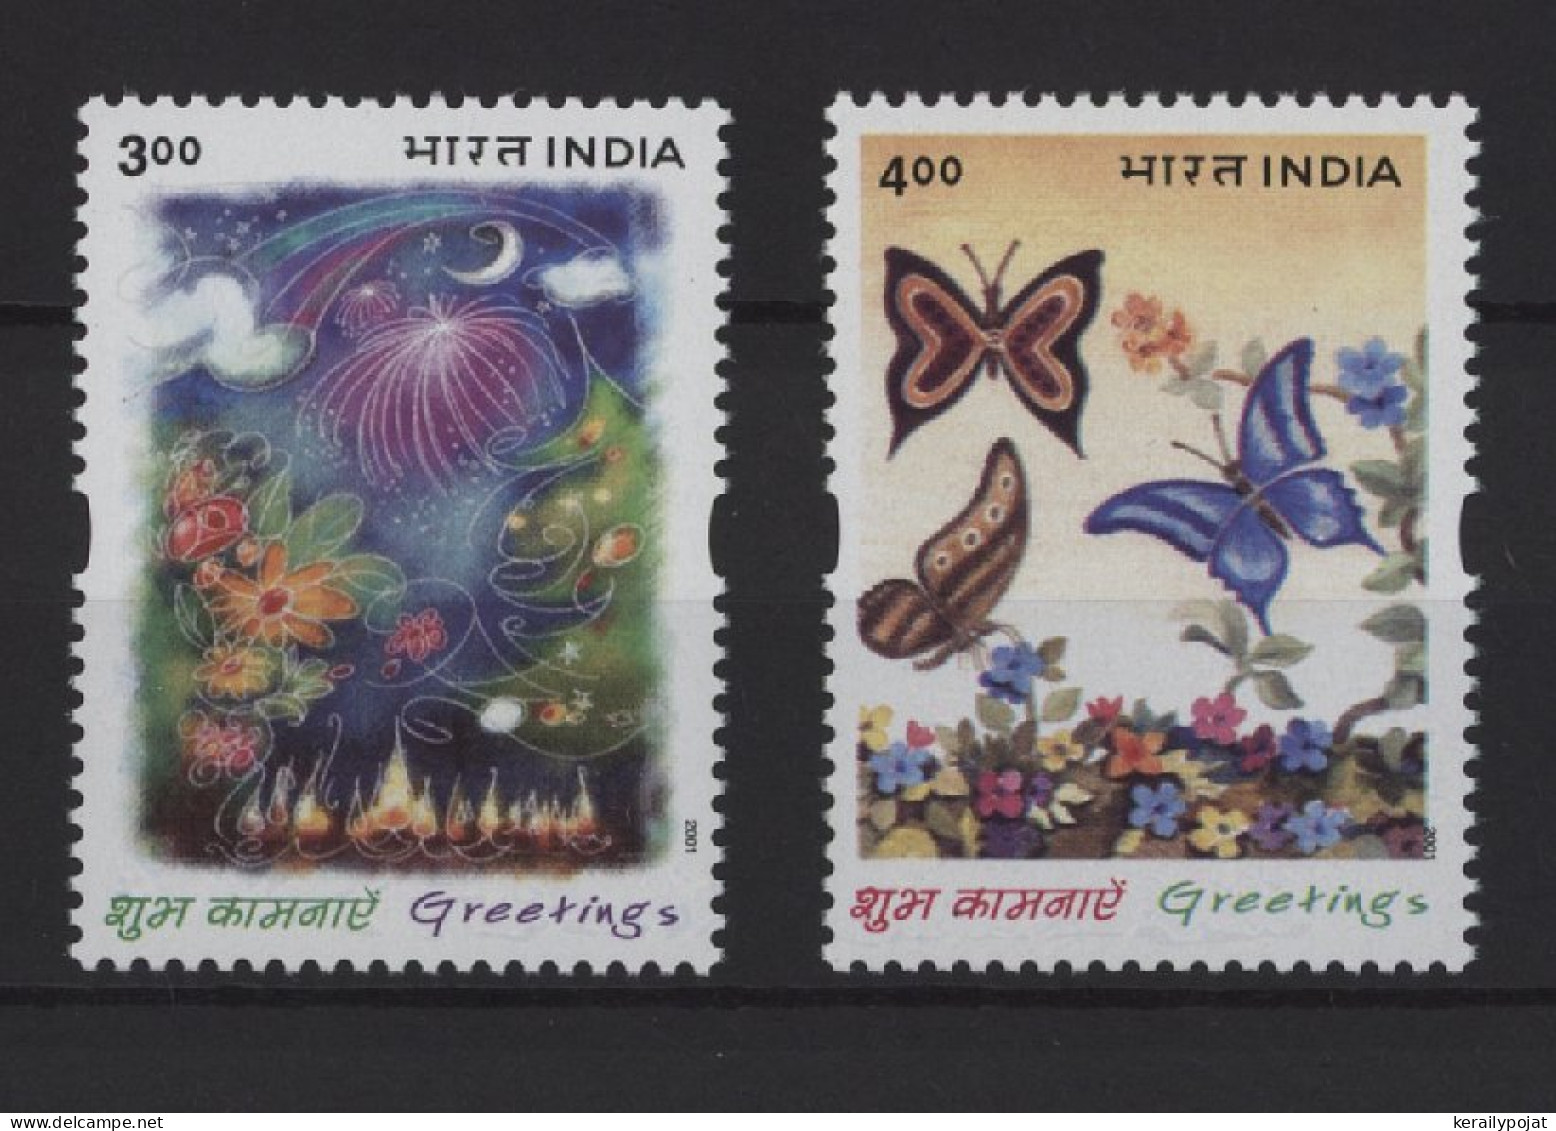 India - 2001 Greeting Stamps MNH__(TH-26891) - Nuovi